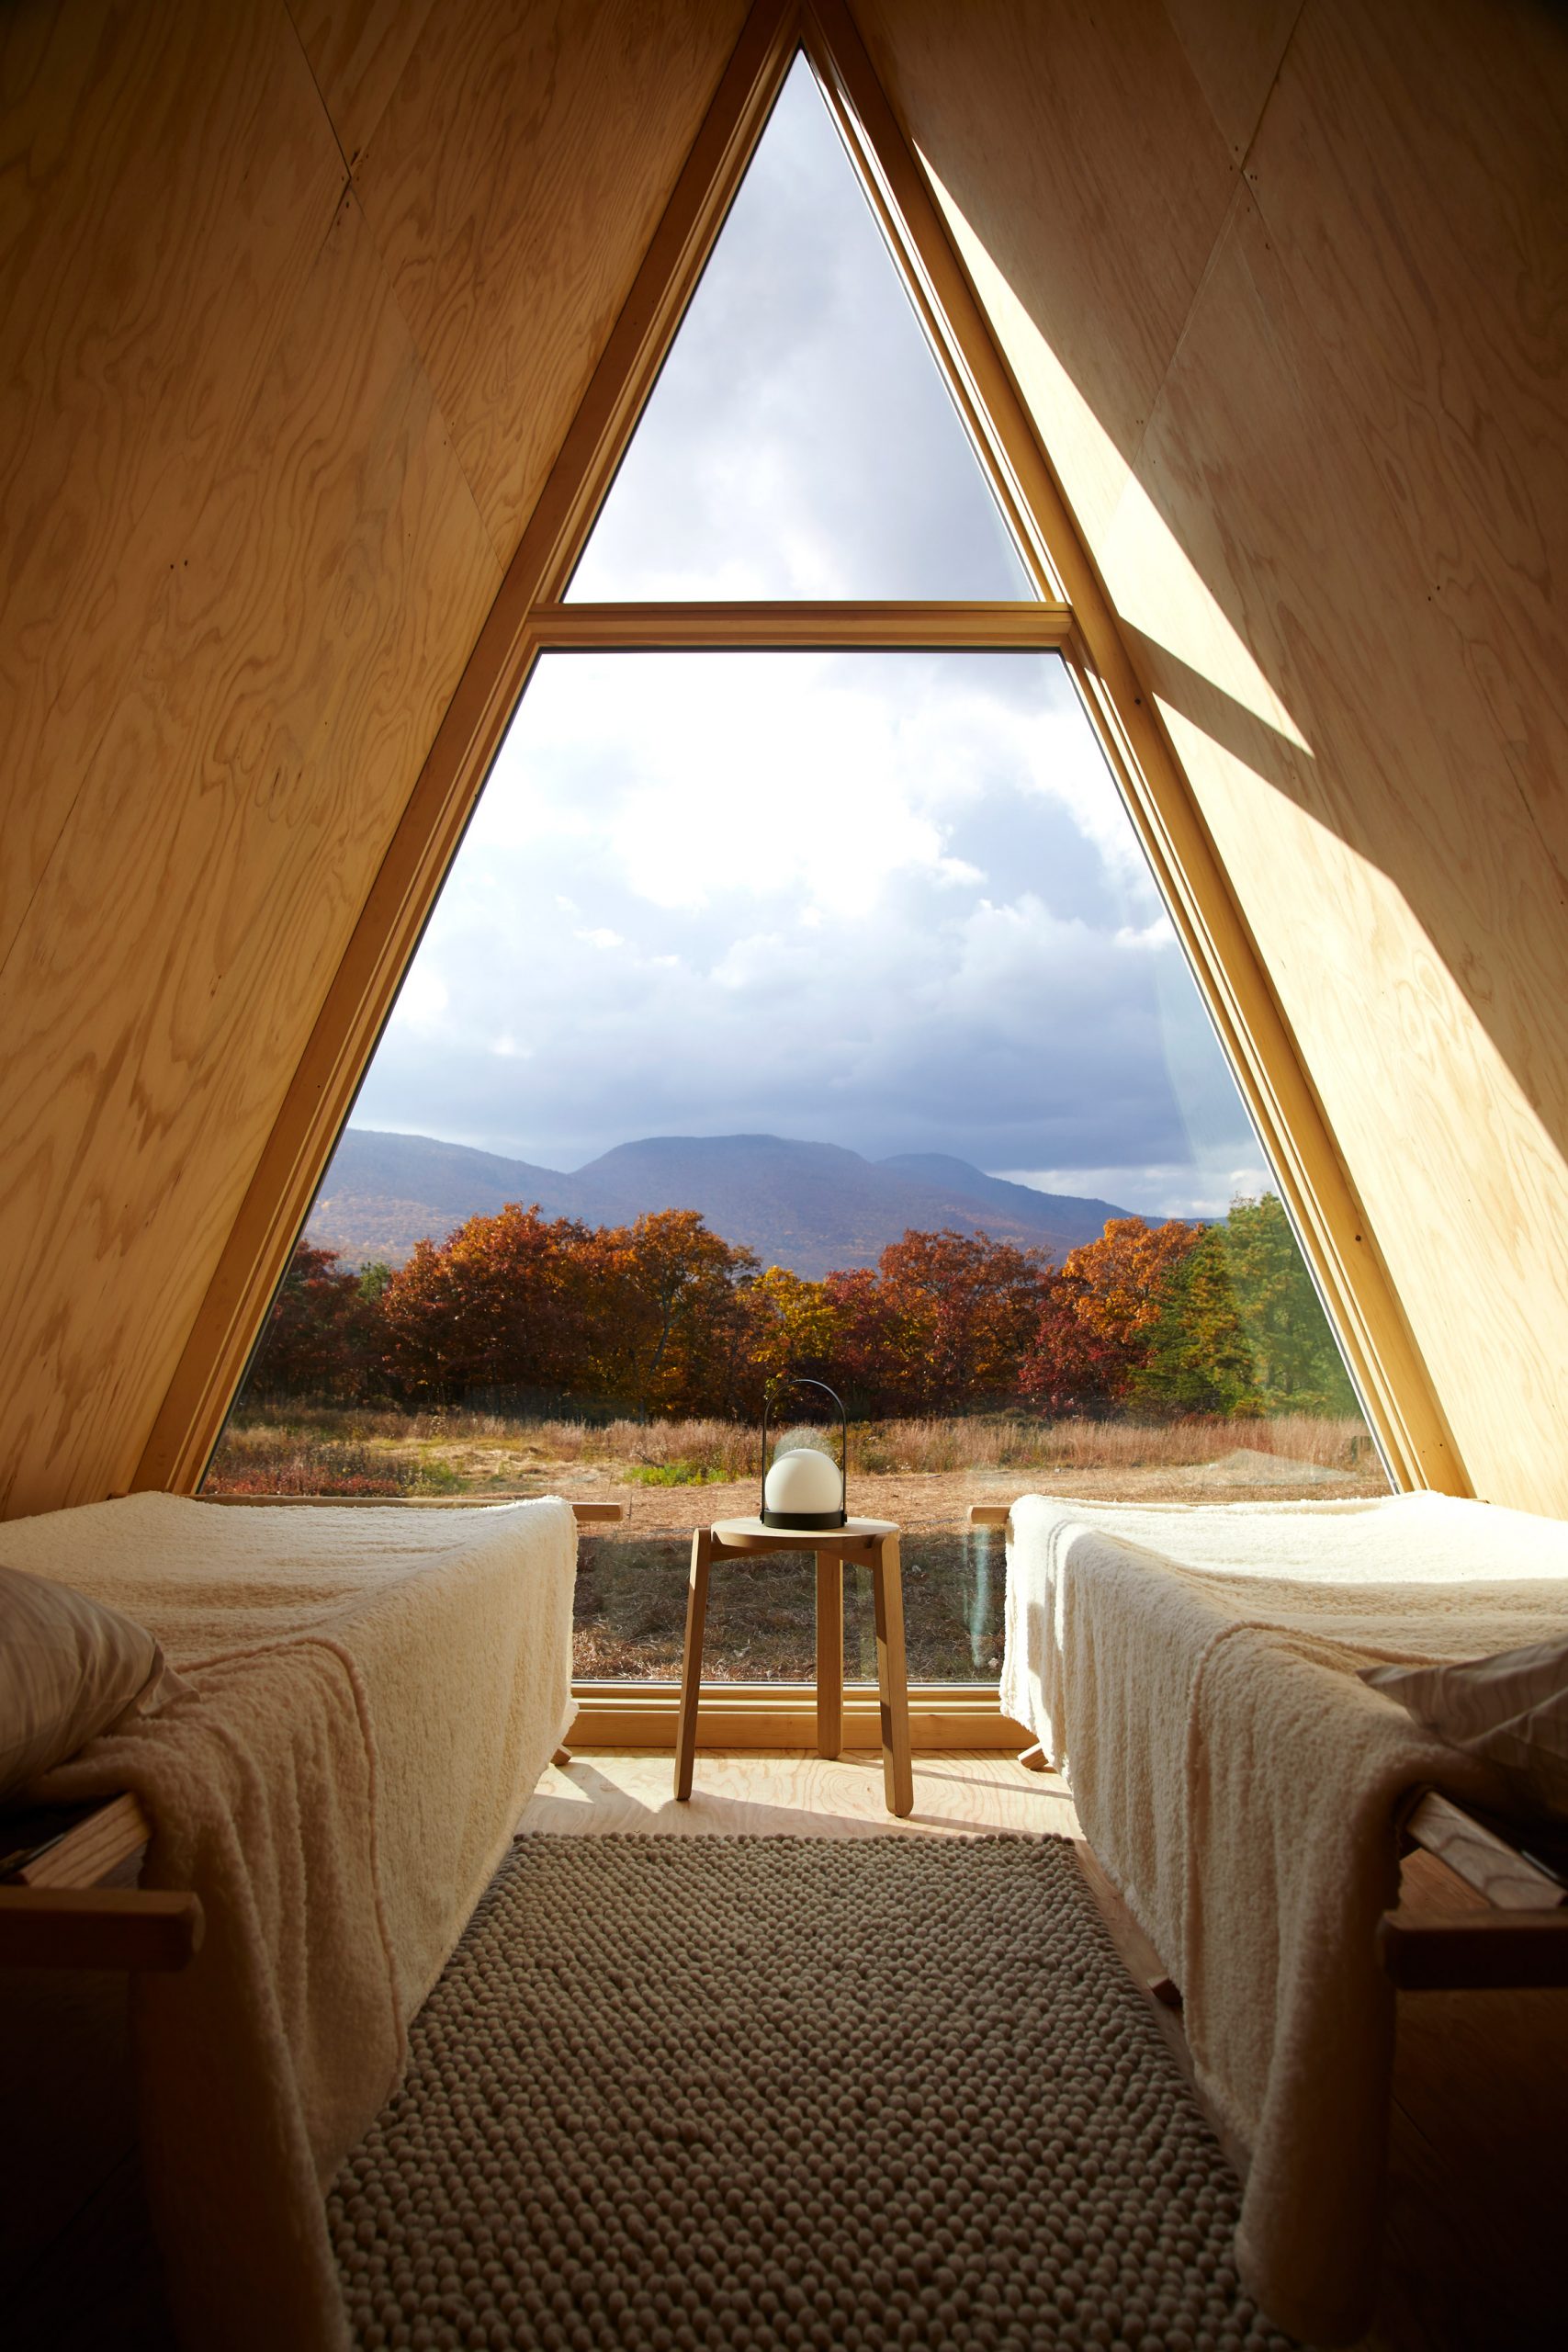 A-frame Cabin Kit by Den Outdoors